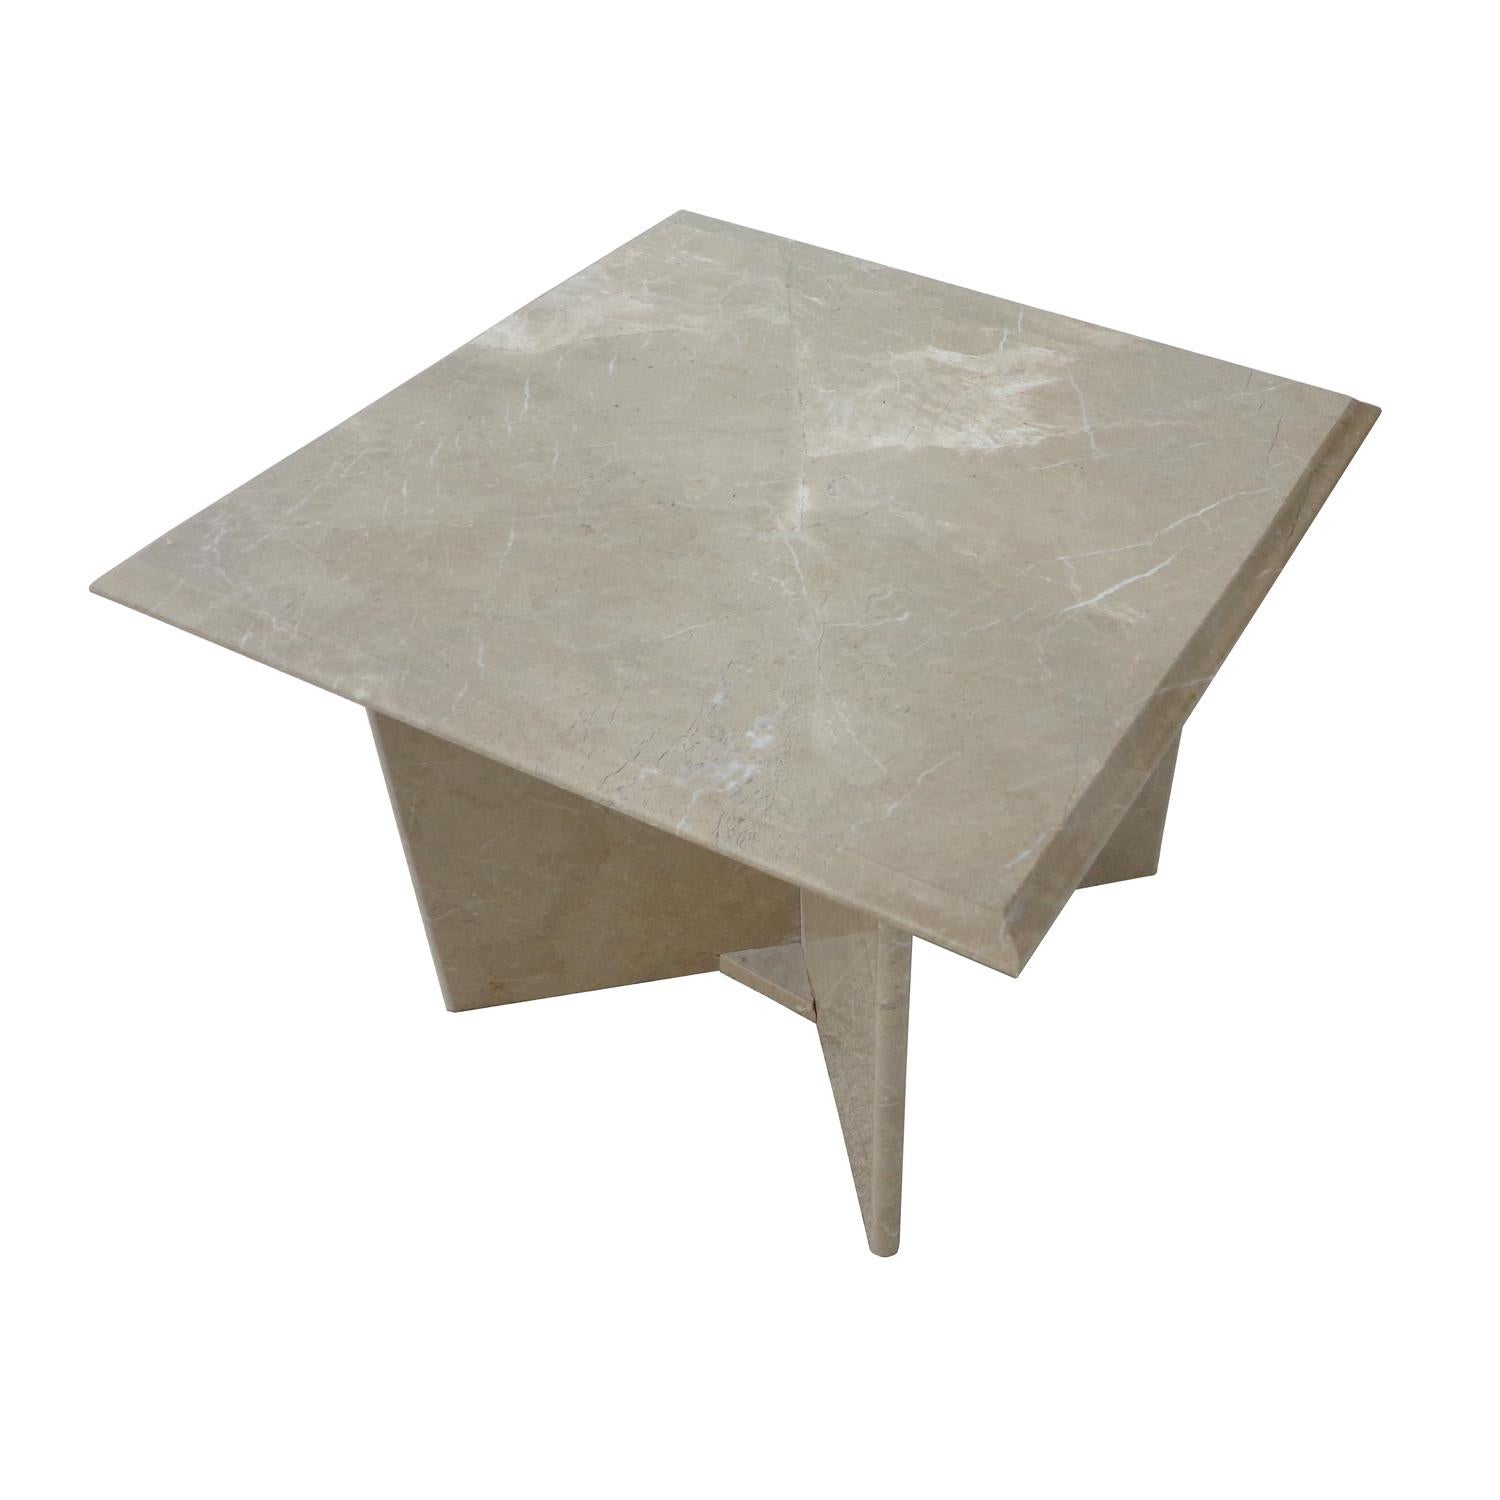 Travertine pedestal side tables
1970s

Square top with an ogee edge.
Base consists of 4 slabs that attach into a star configuration. 
 

 
  